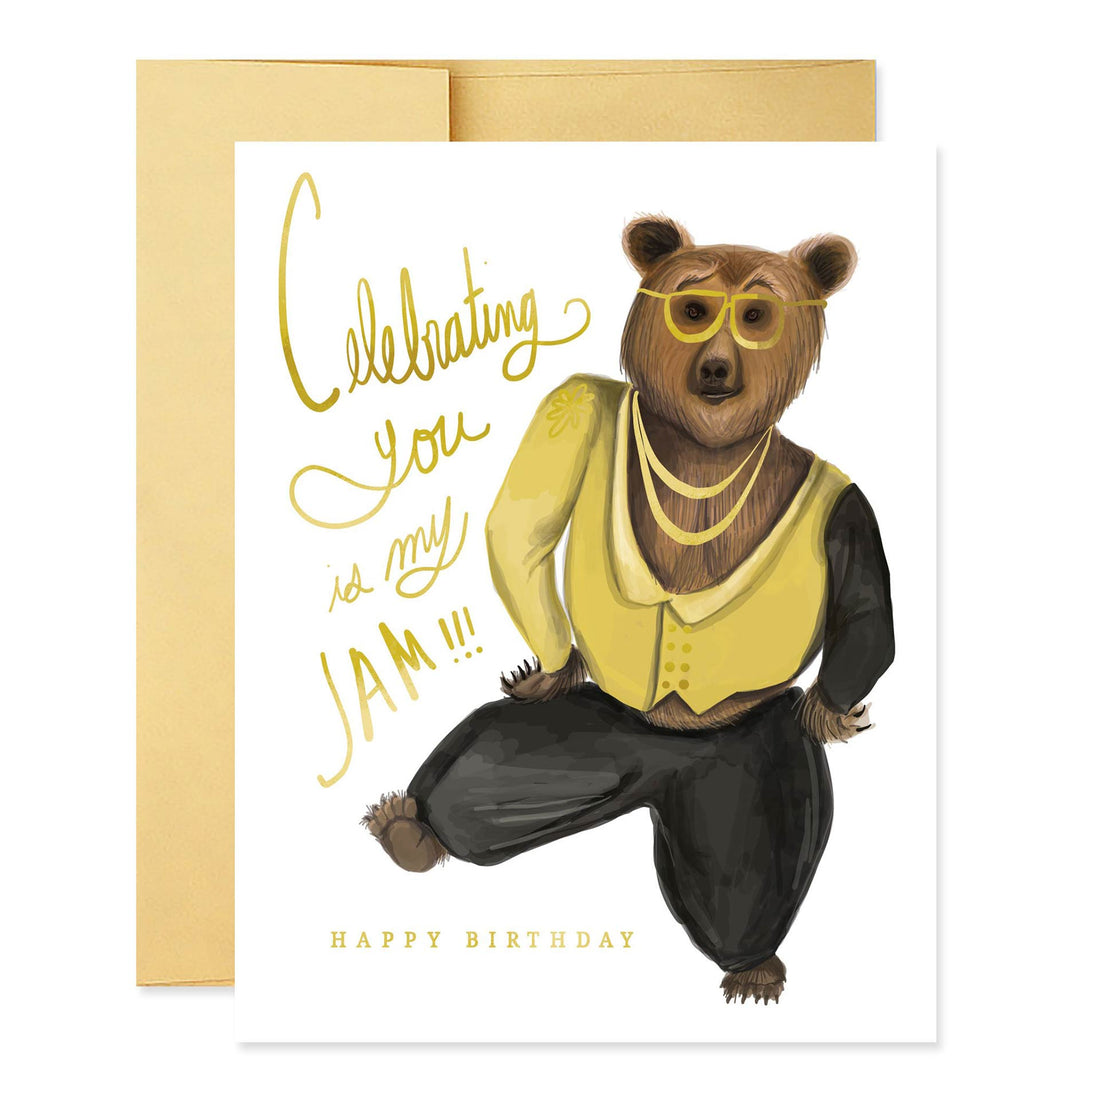 A whimsical My Jam birthday card by Good Juju Ink featuring a hand-illustrated bear dressed in human clothes with glasses and the phrase &quot;celebrating you is my jam!!! happy birthday&quot;.